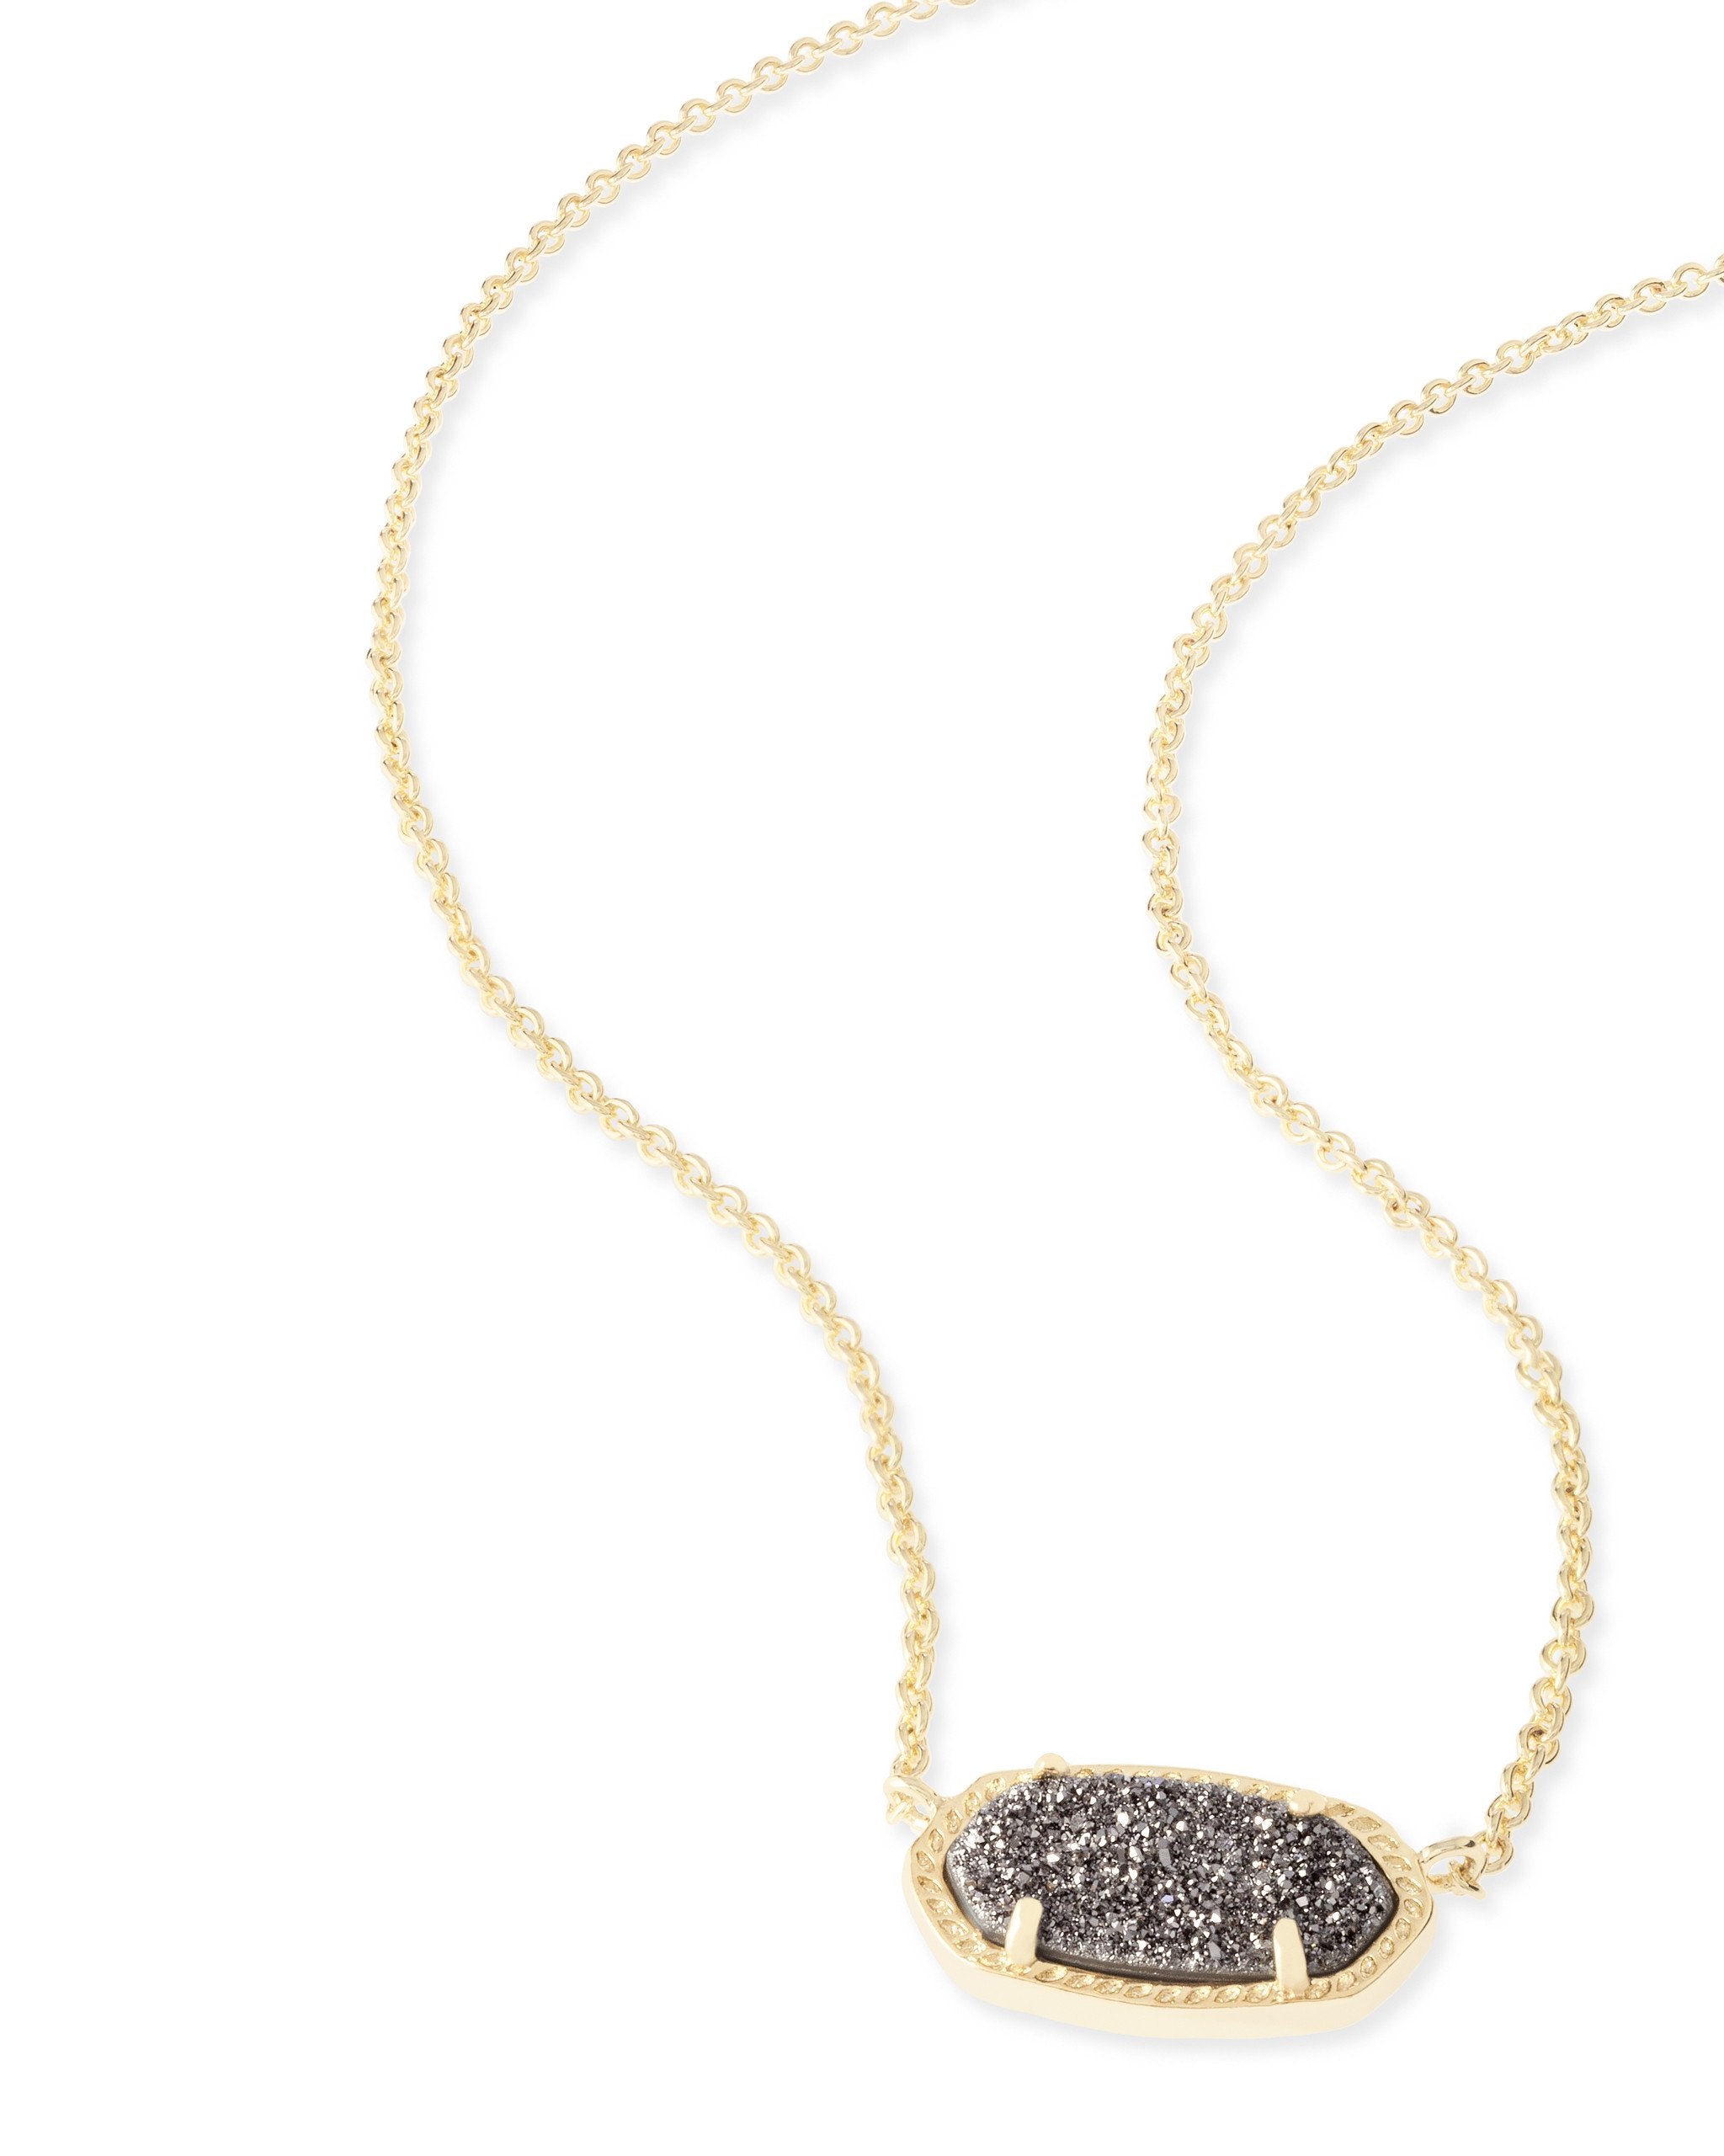 Detail Shot of Kendra Scott Elisa Oval Pendant Necklace in Platinum Drusy and Gold Plated